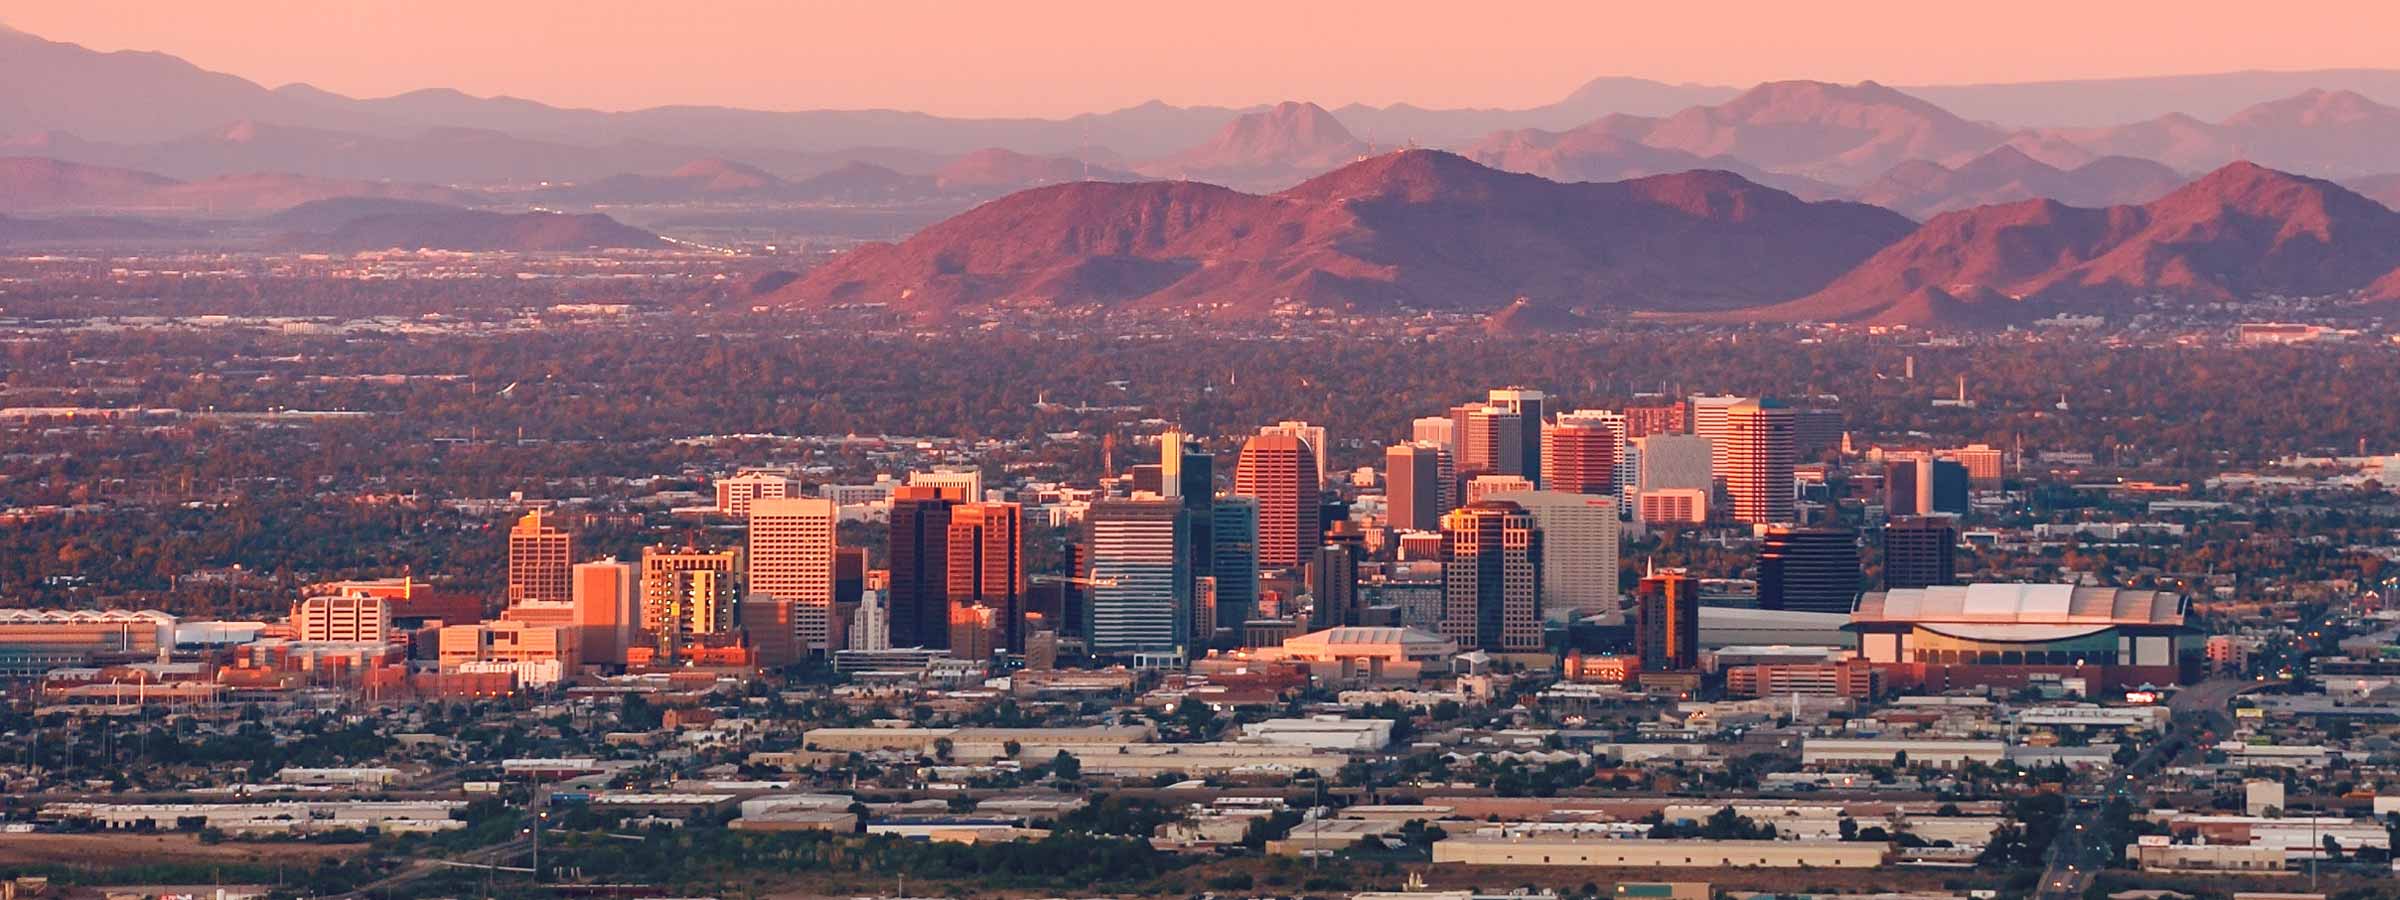 Aerial view of the city of Phoenix